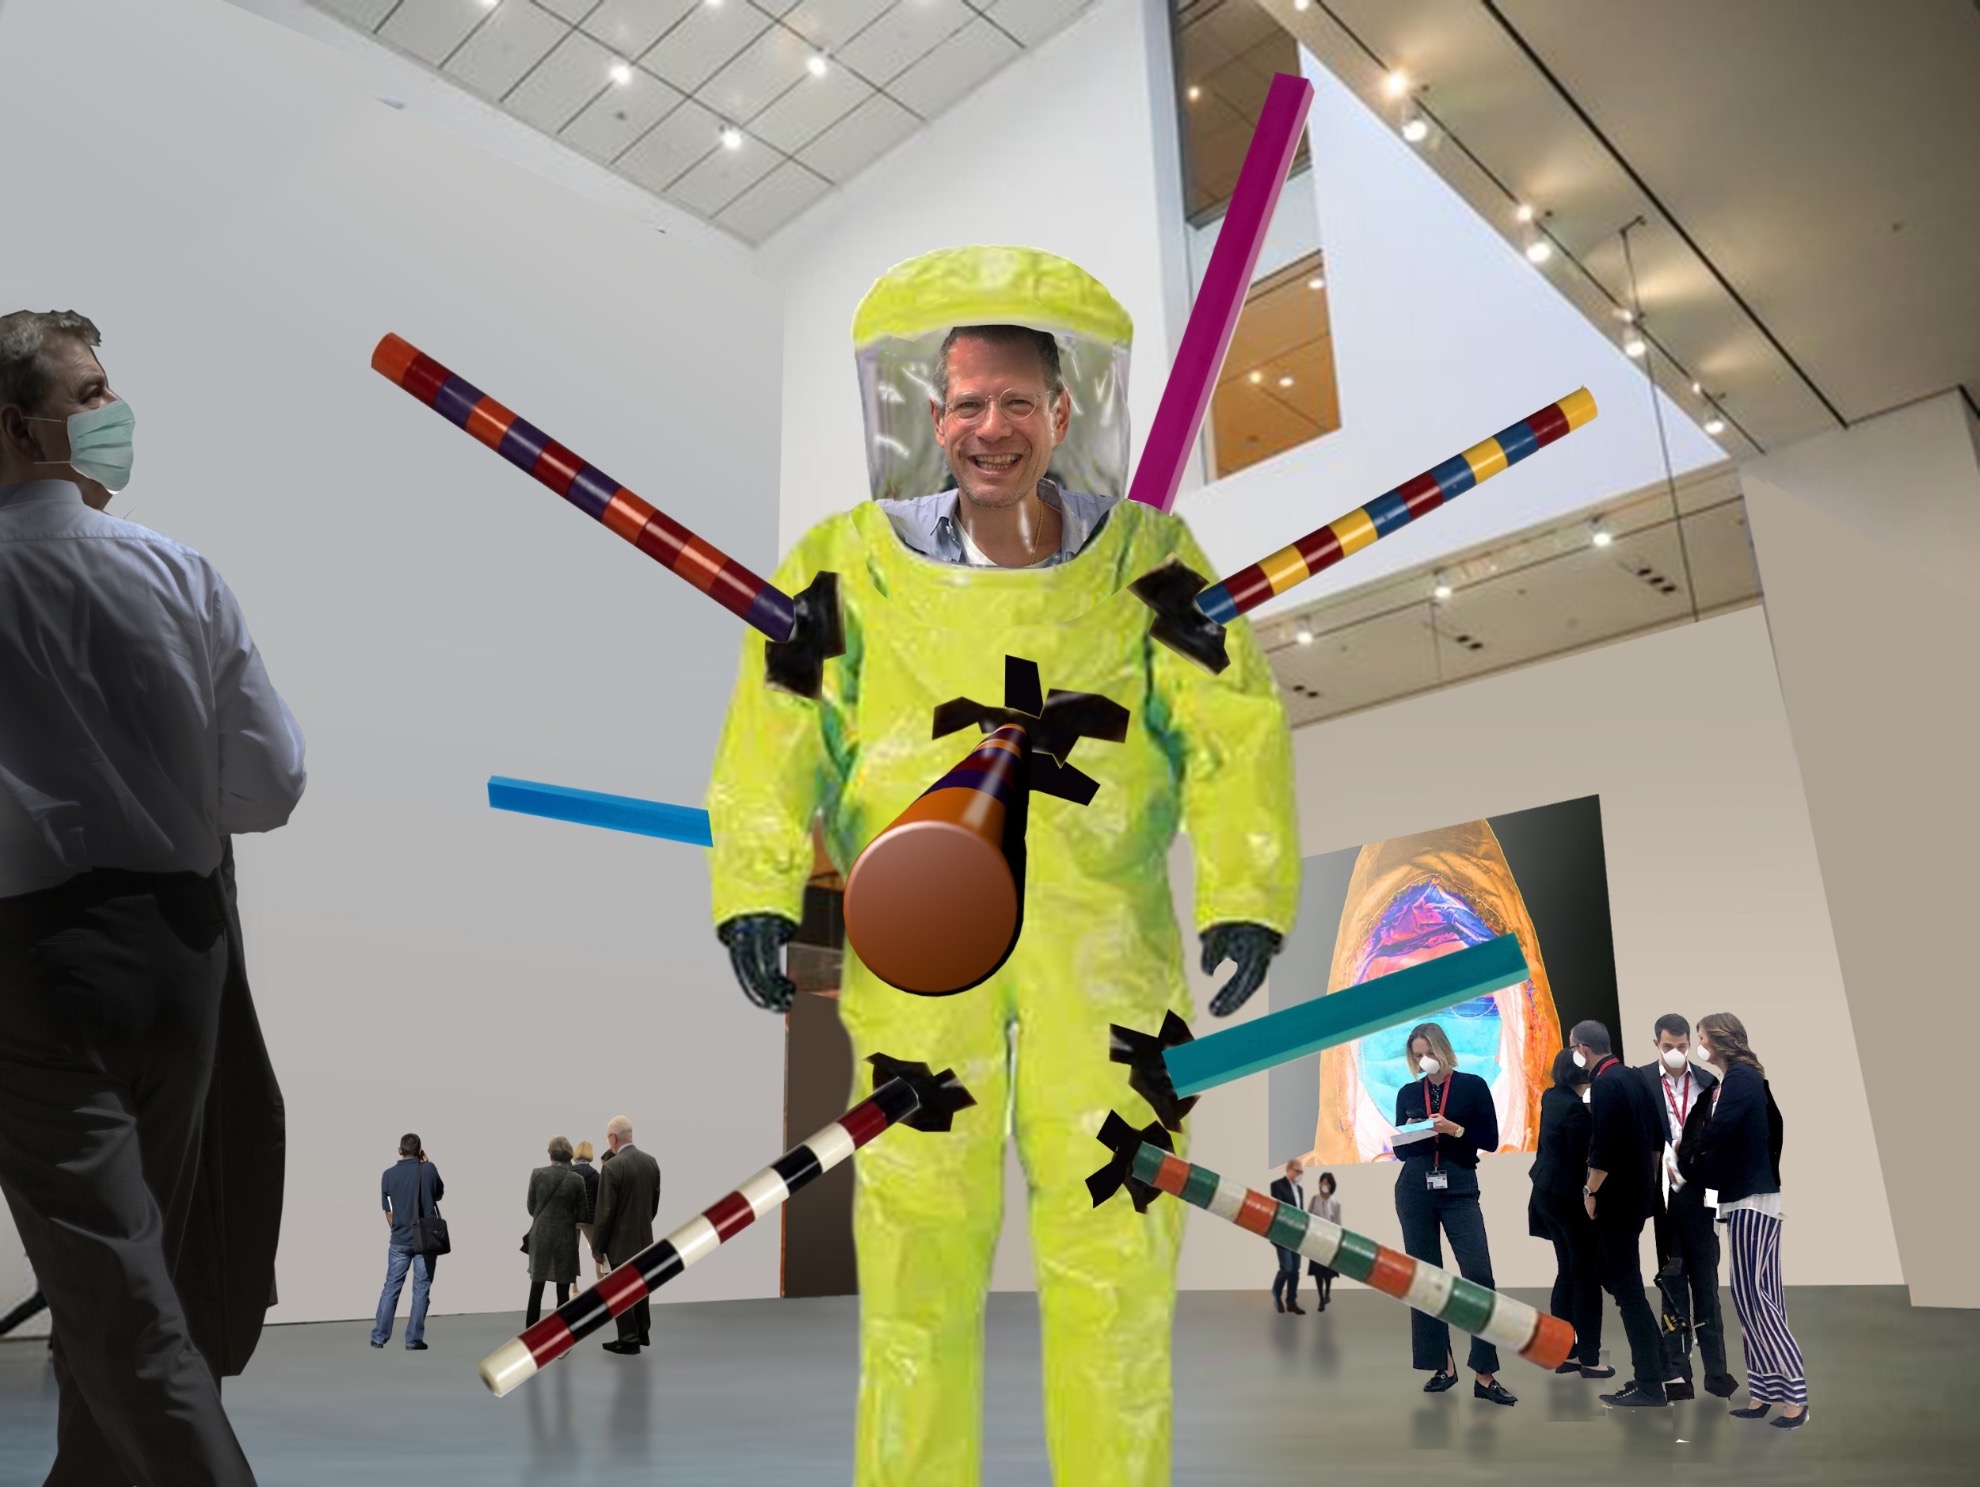 As Coronavirus Upends the Art World, Kenny Schachter Hits the Fairs (and Shares a Convo With His Frenemy Inigo Philbrick)